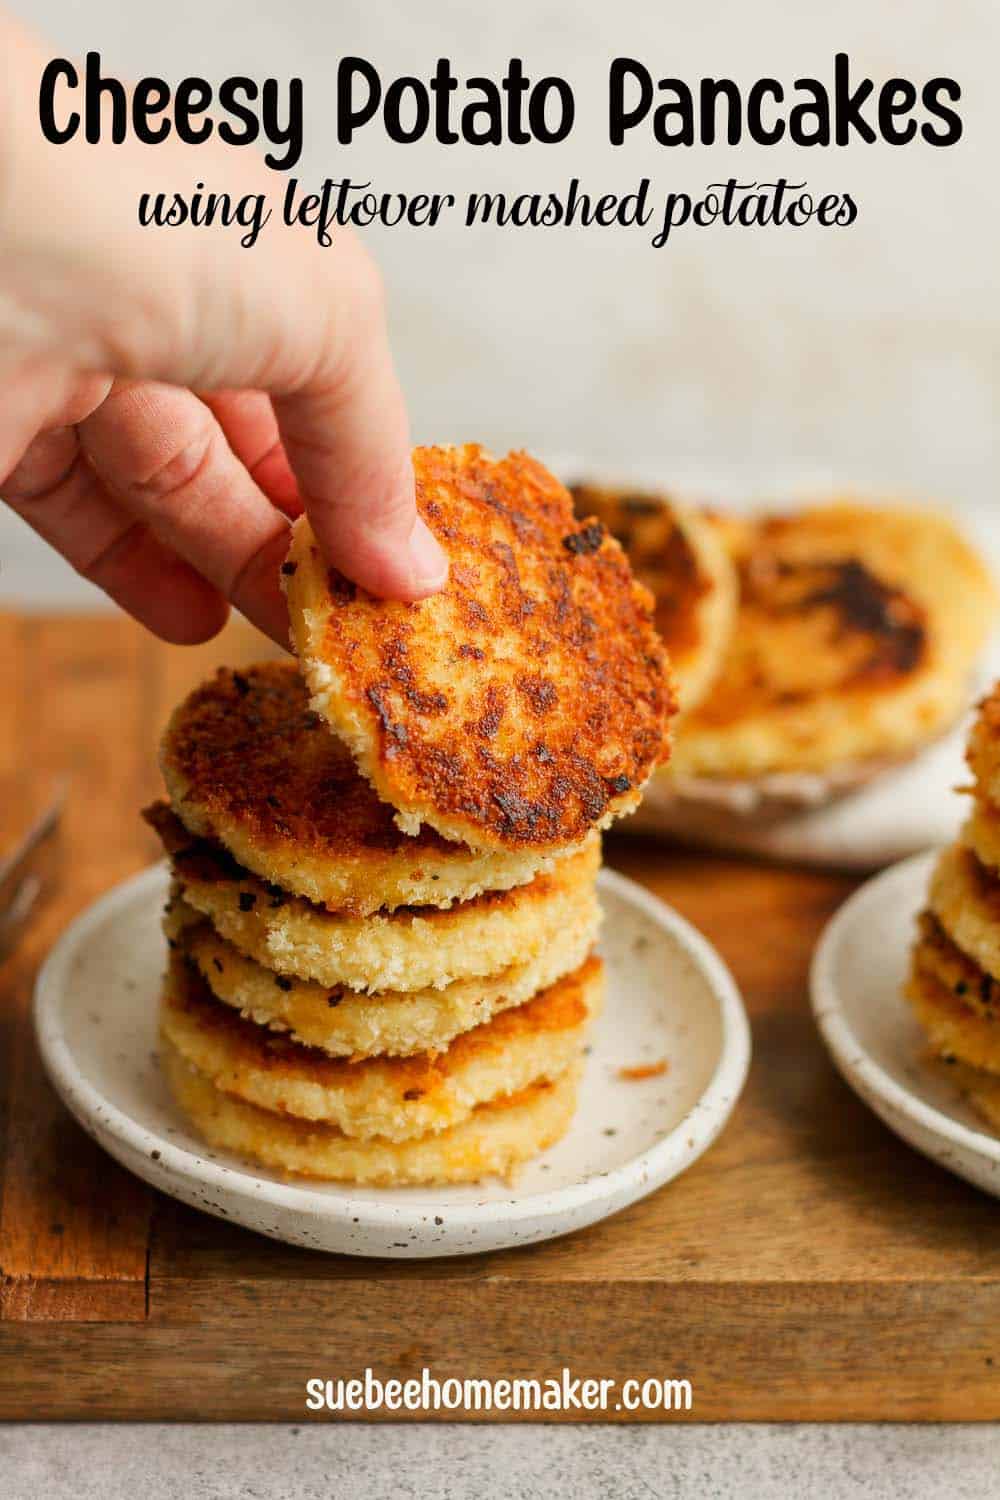 My hand reaching for a cheesy potato pancake from a stack of cakes.